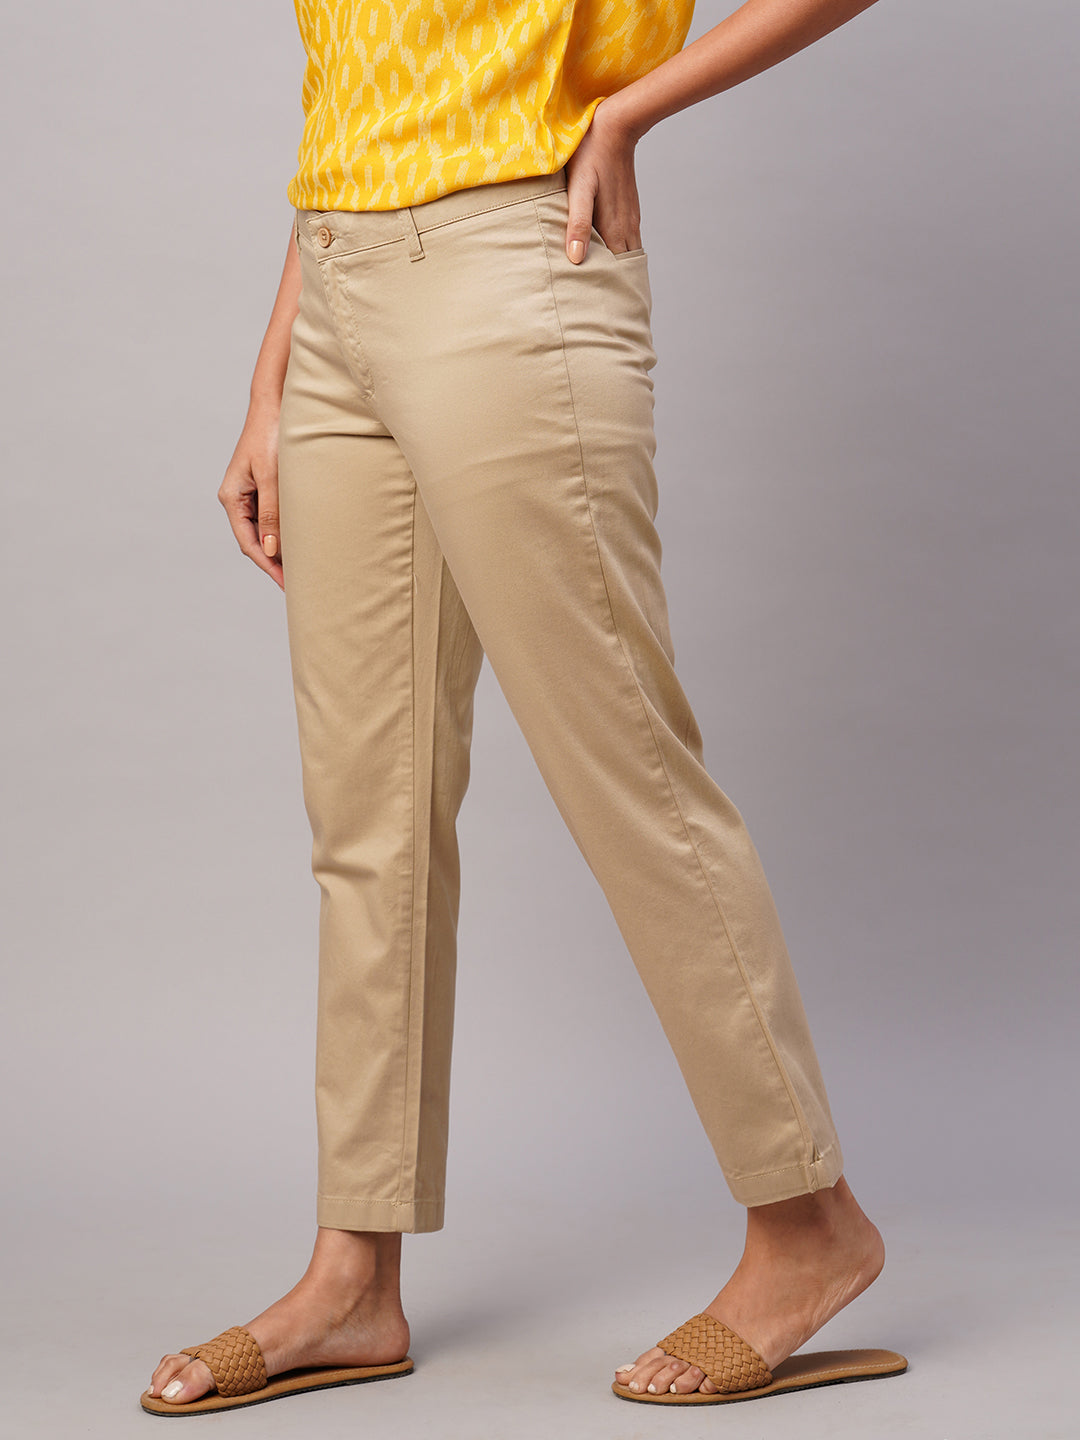 Summer Wear Cotton Lycra Trousers For Women And Girls at Rs 330/piece, sanganer, Jaipur